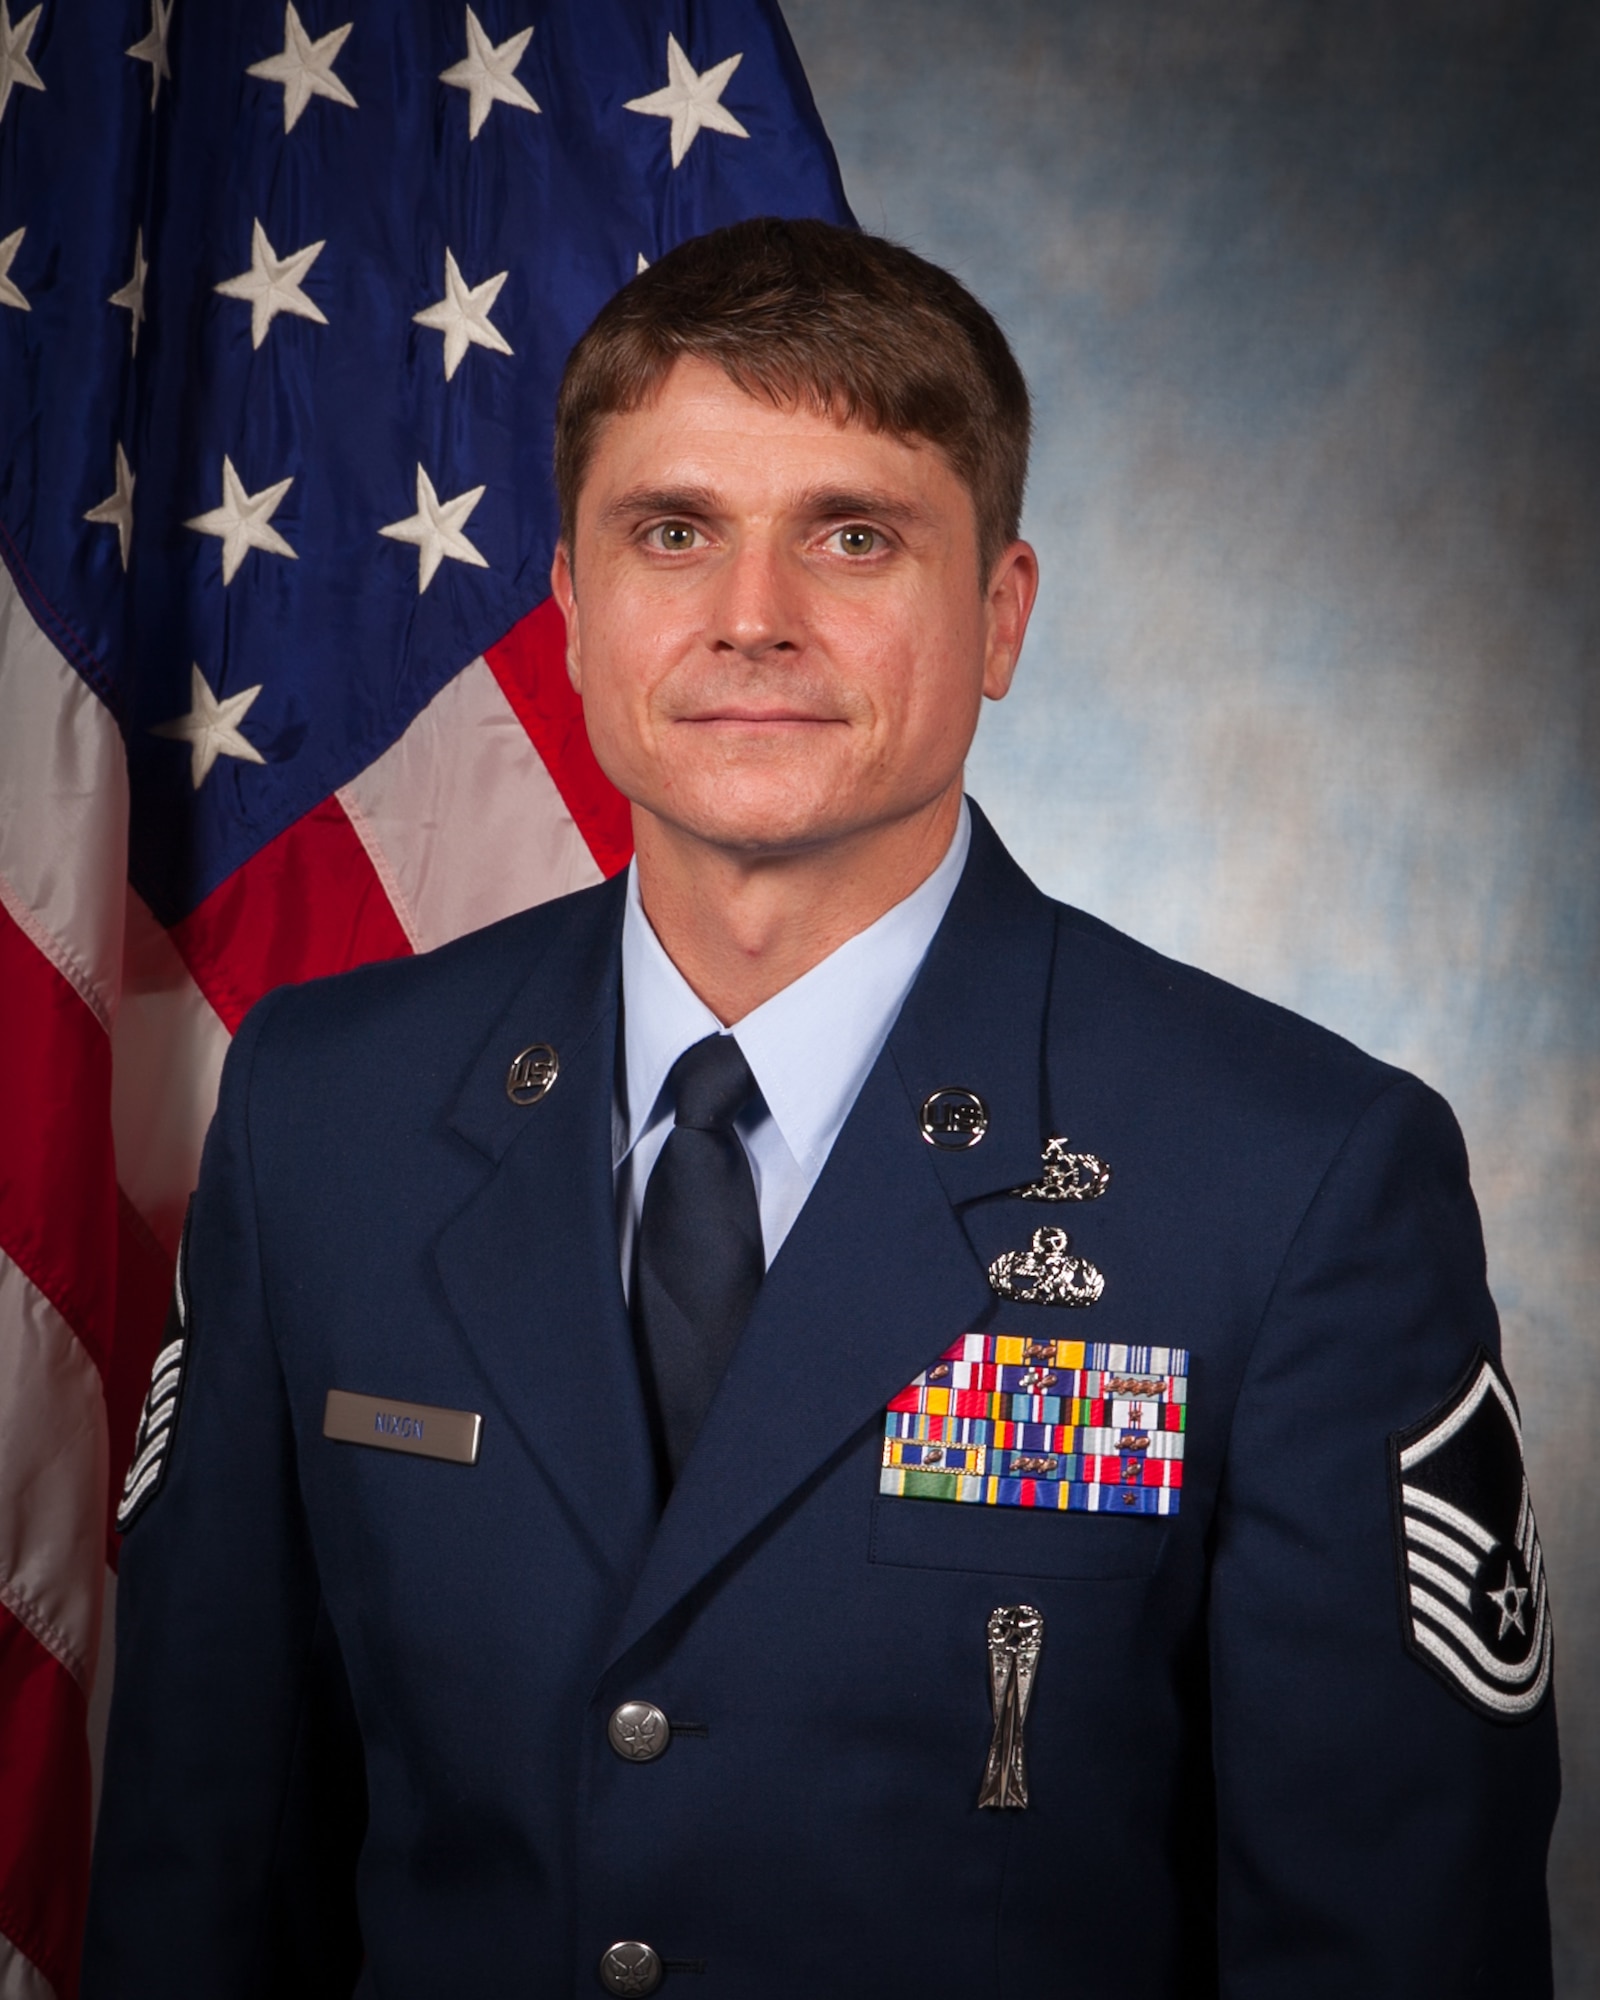 On September 9, the National Safety Council awarded the Rising Star of Safety award to Master Sgt. Jeremy Nixon, Headquarters Pacific Air Forces occupational safety manager, for his continued dedication to safety and contributions to the Air Force safety community.